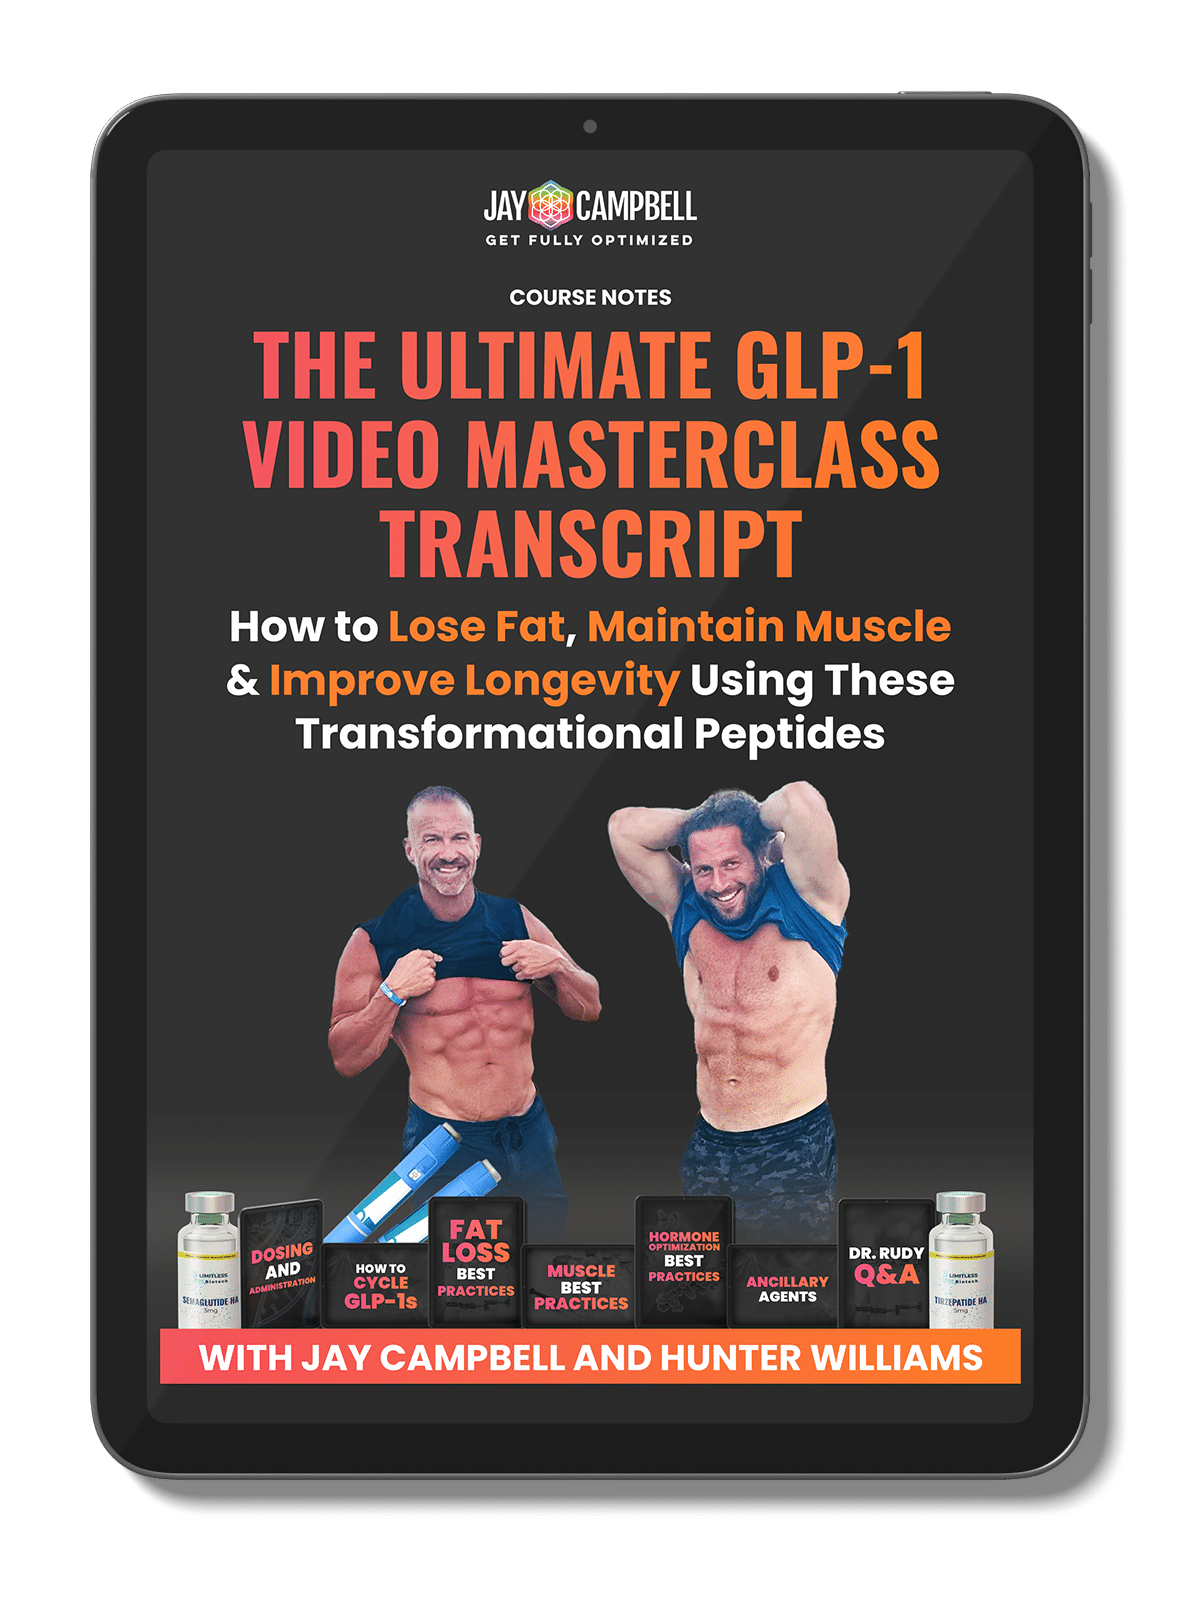 The Ultimate GLP-1 Video Masterclass